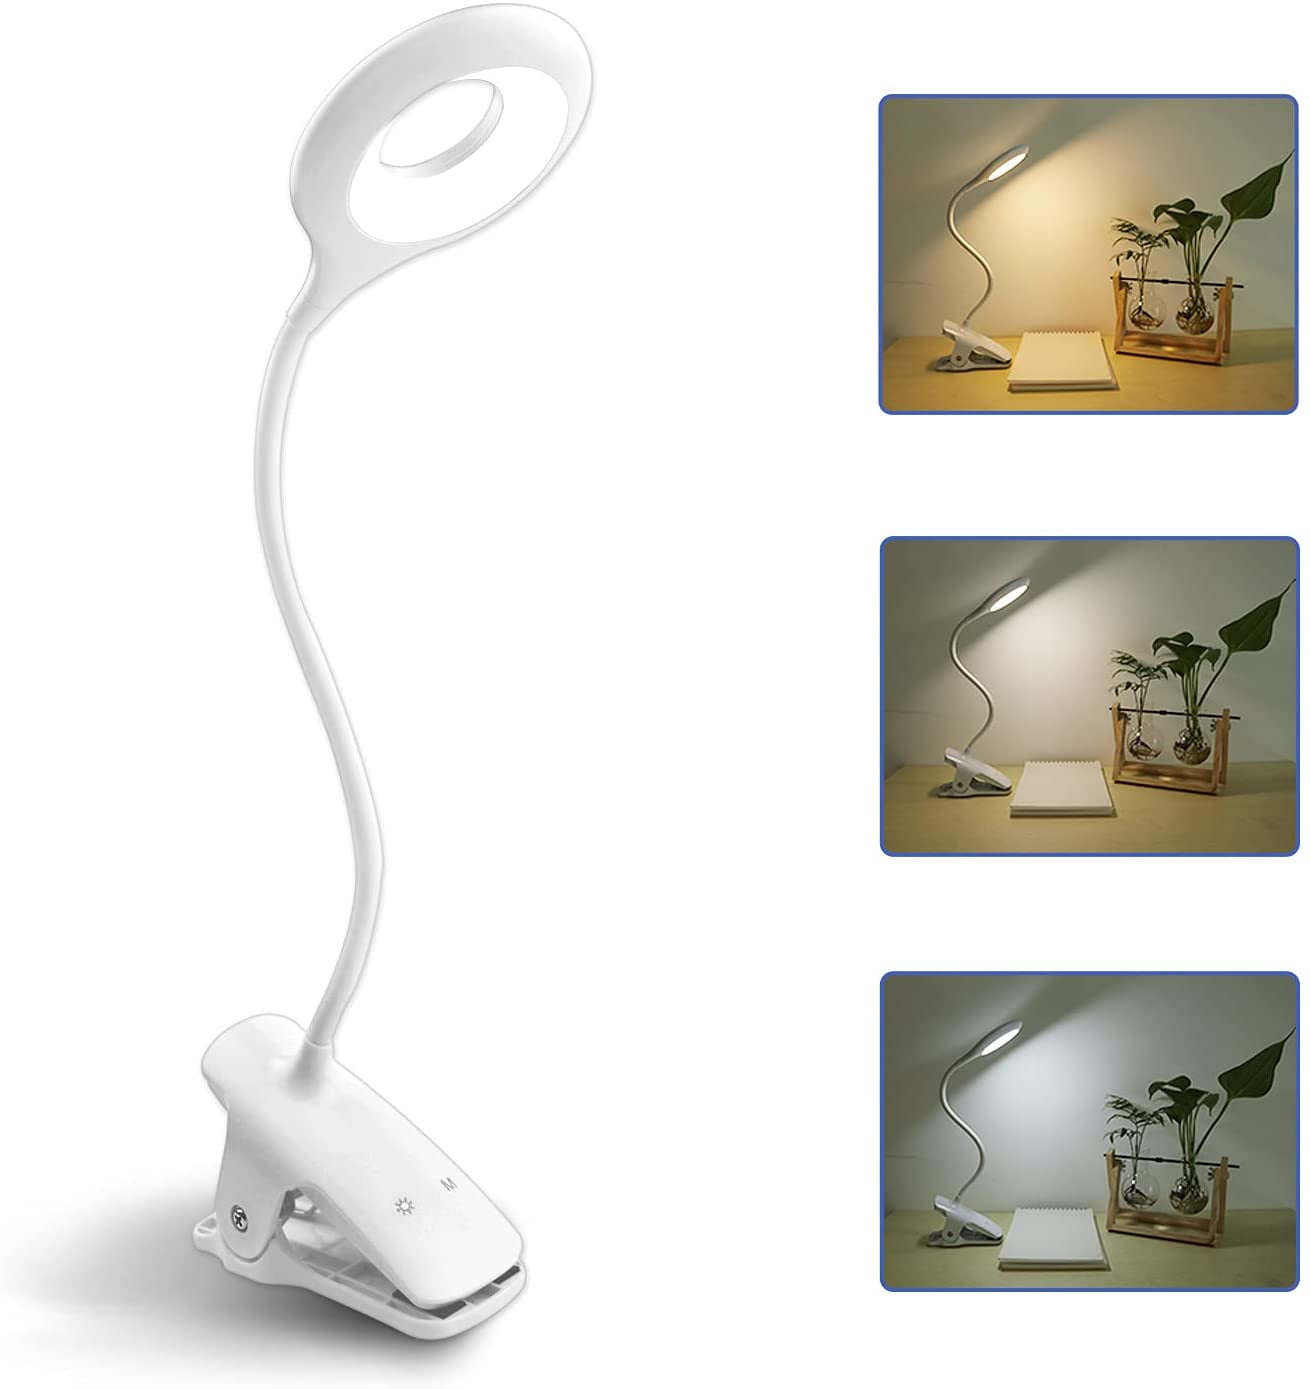 Book Reading Light Clip Light Touch Sensitive Control 3 Brightness Raniaco Desk Lamp with Flexible Neck A-White Eye-Protect Night Light and Rechargeable LED Lamps in Bed 